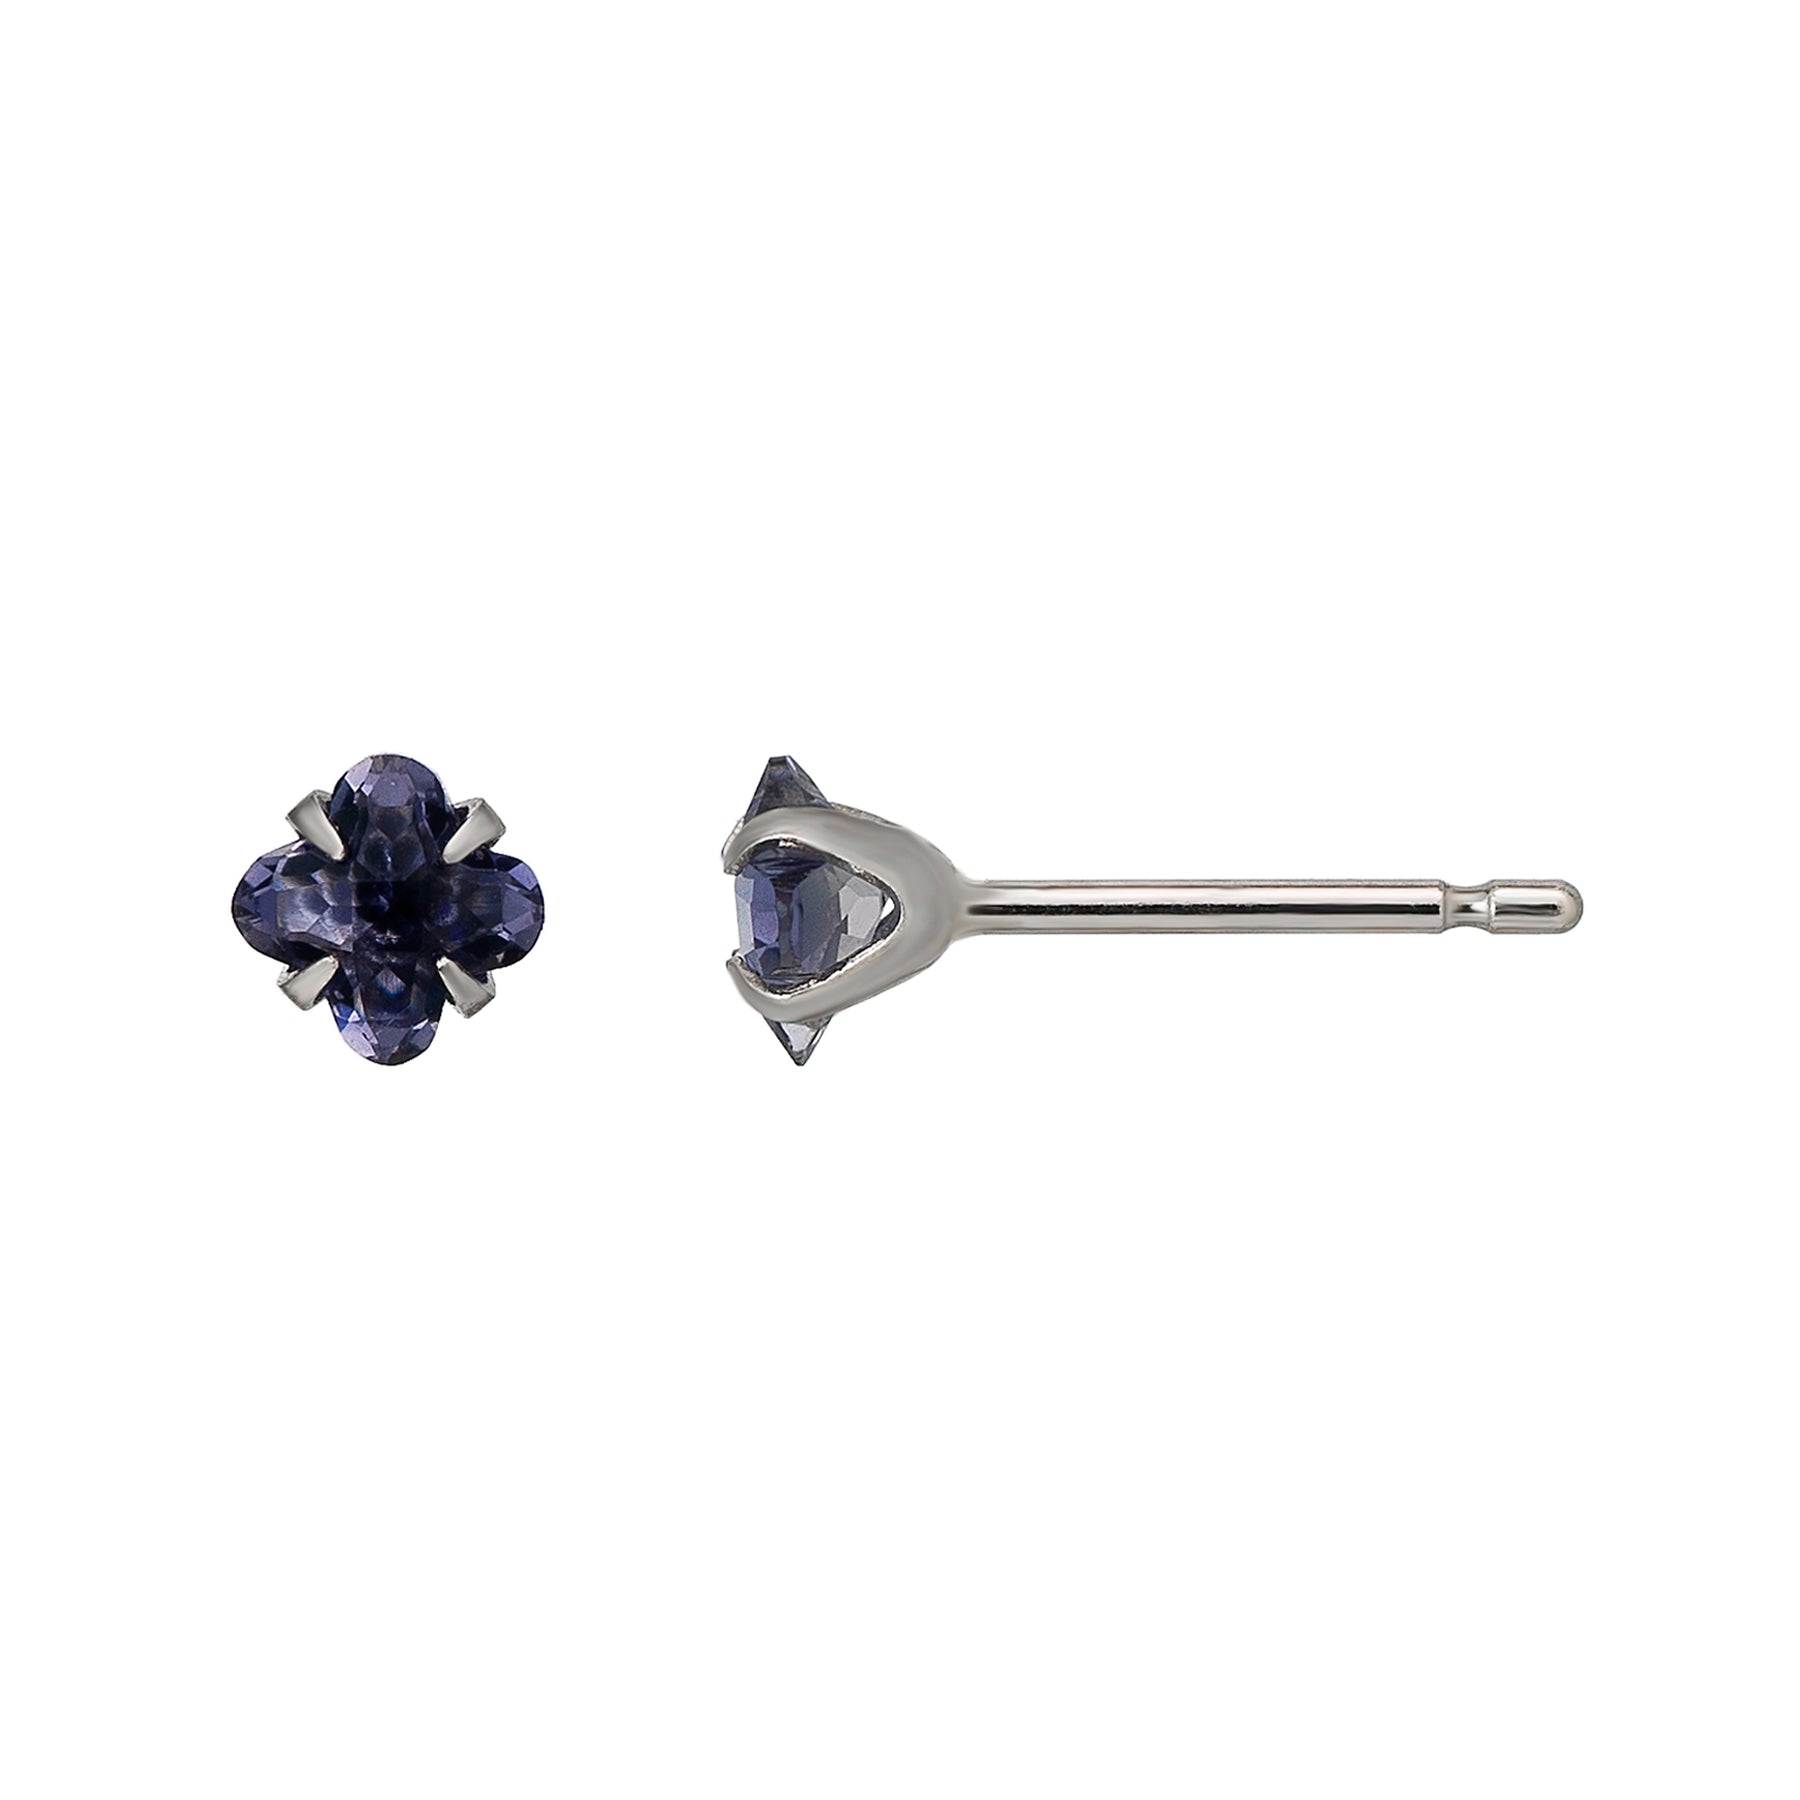 [Second Earrings] Platinum Lily Cut Iolite Earrings - Product Image